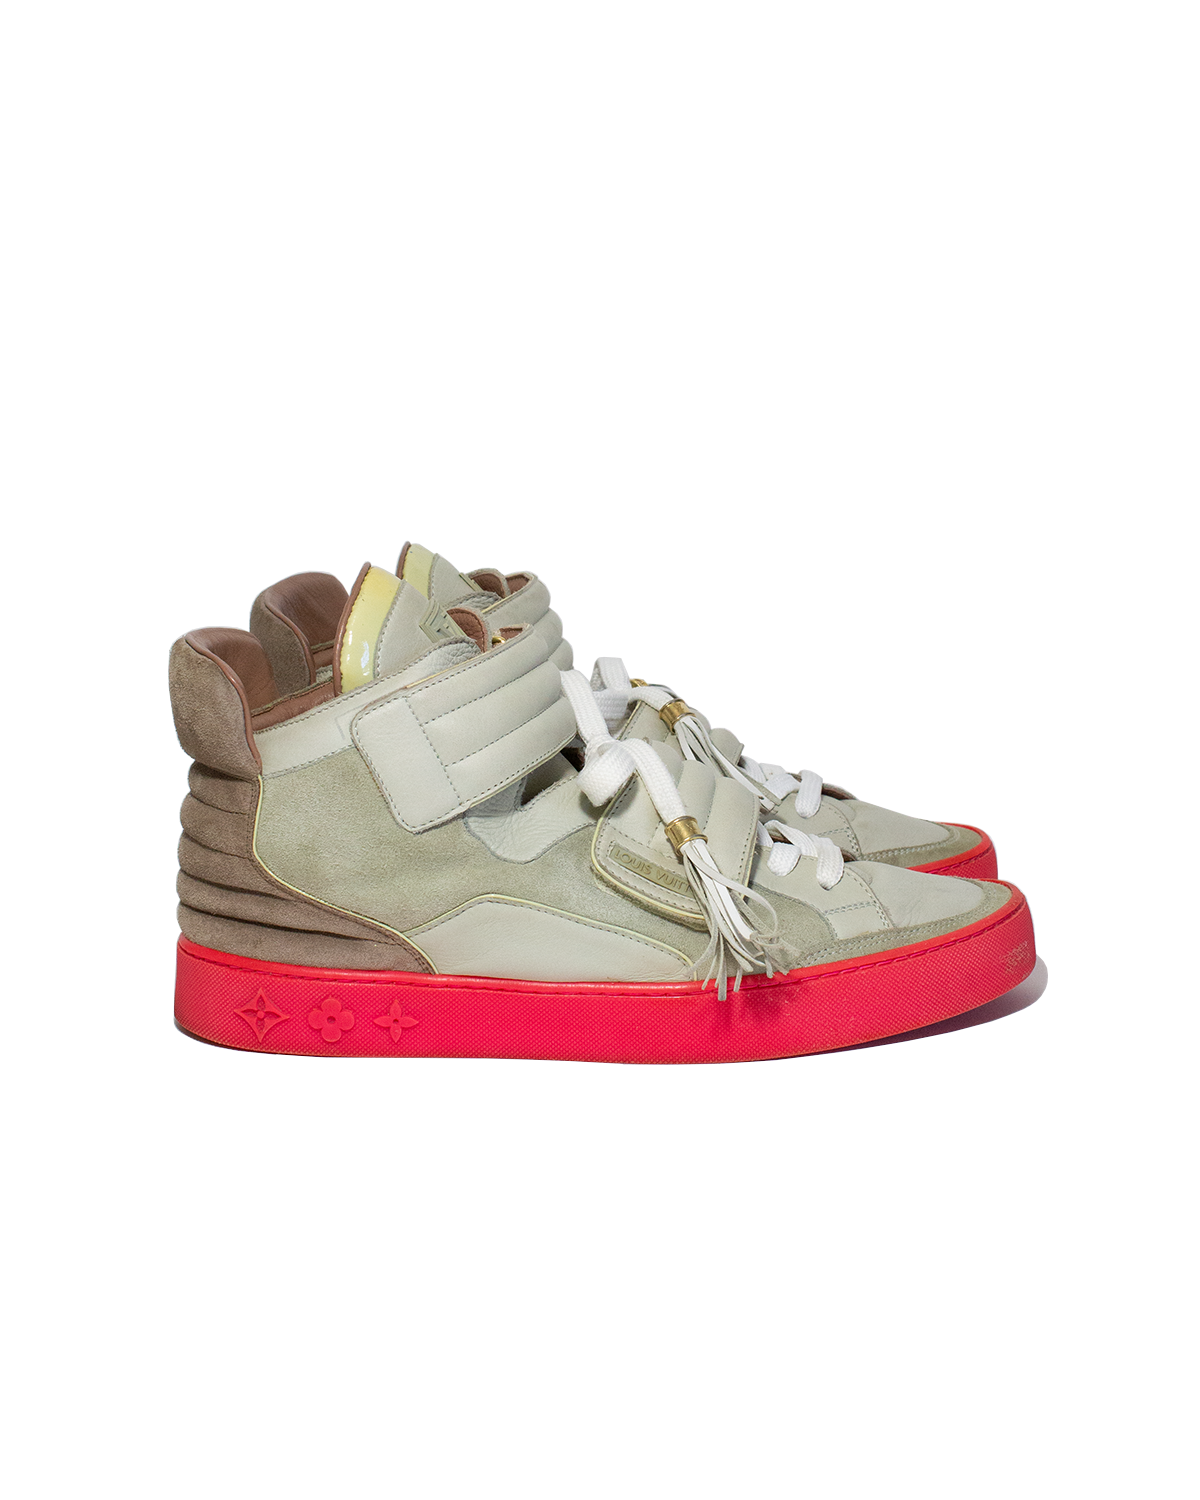 Louis Vuitton Sneakers designed by Kanye West